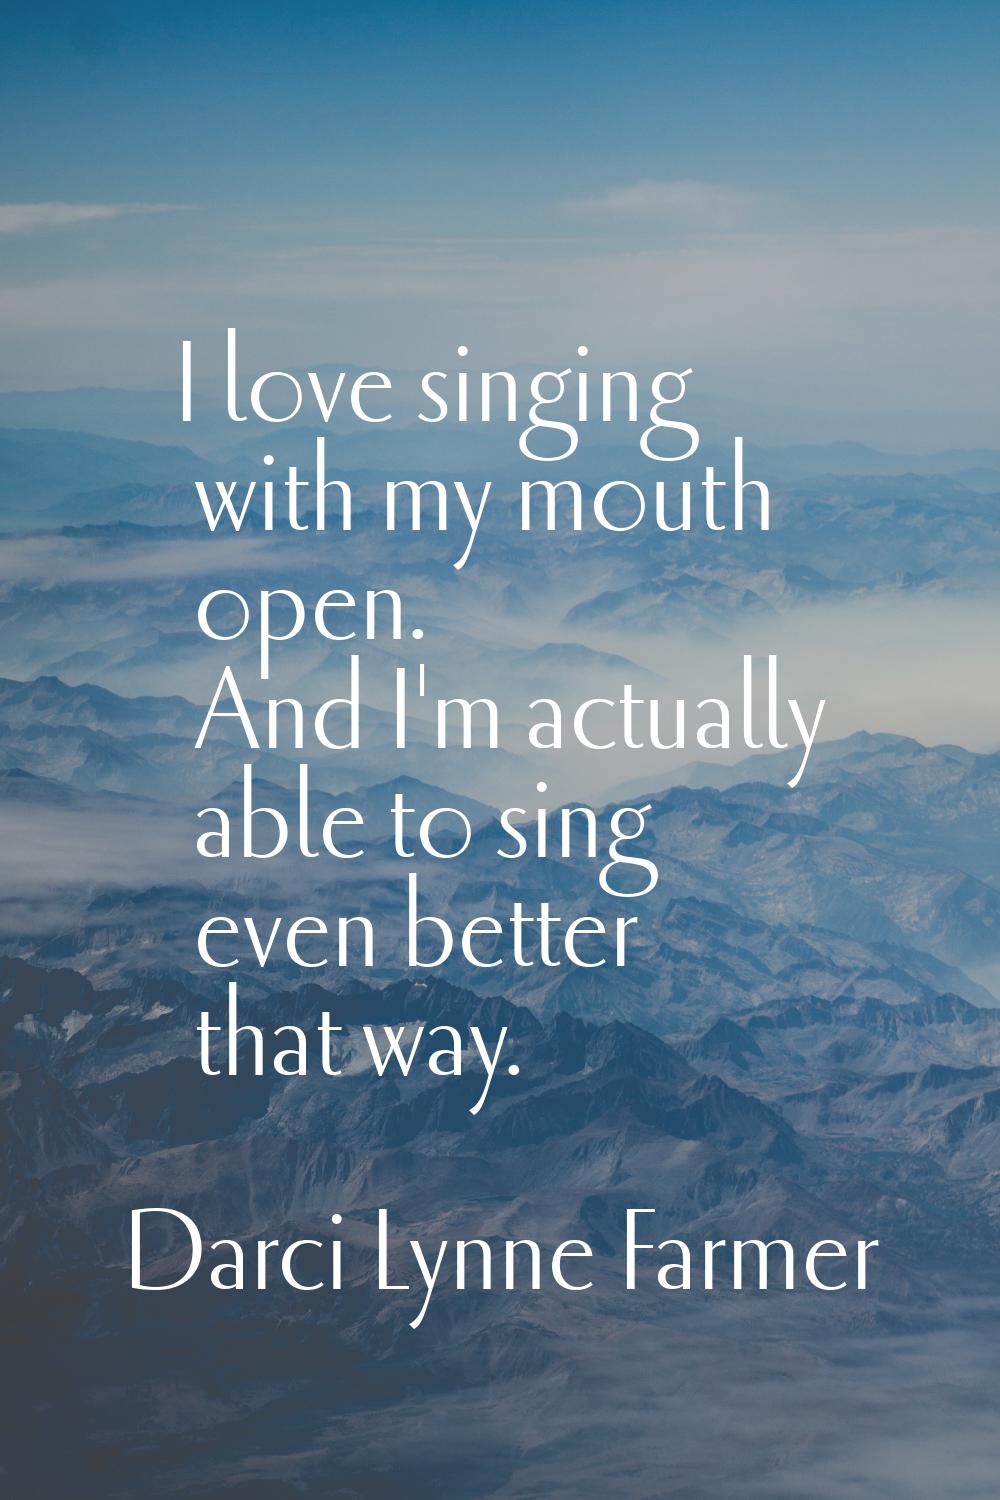 I love singing with my mouth open. And I'm actually able to sing even better that way.